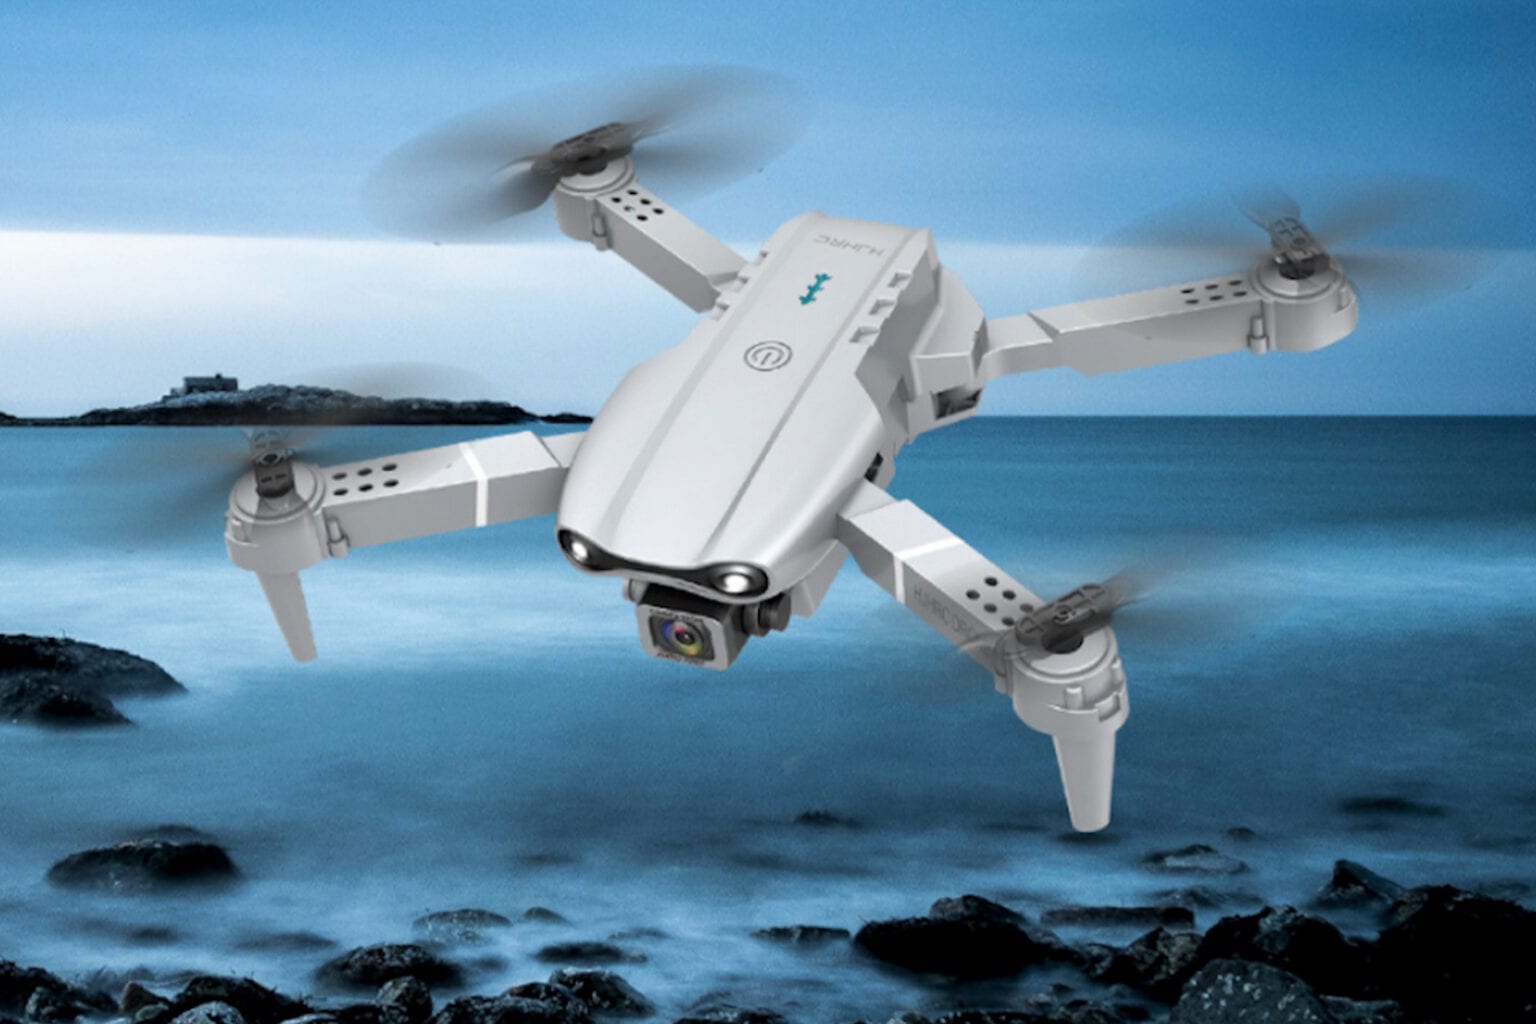 These double-pack of drones is on sale now.